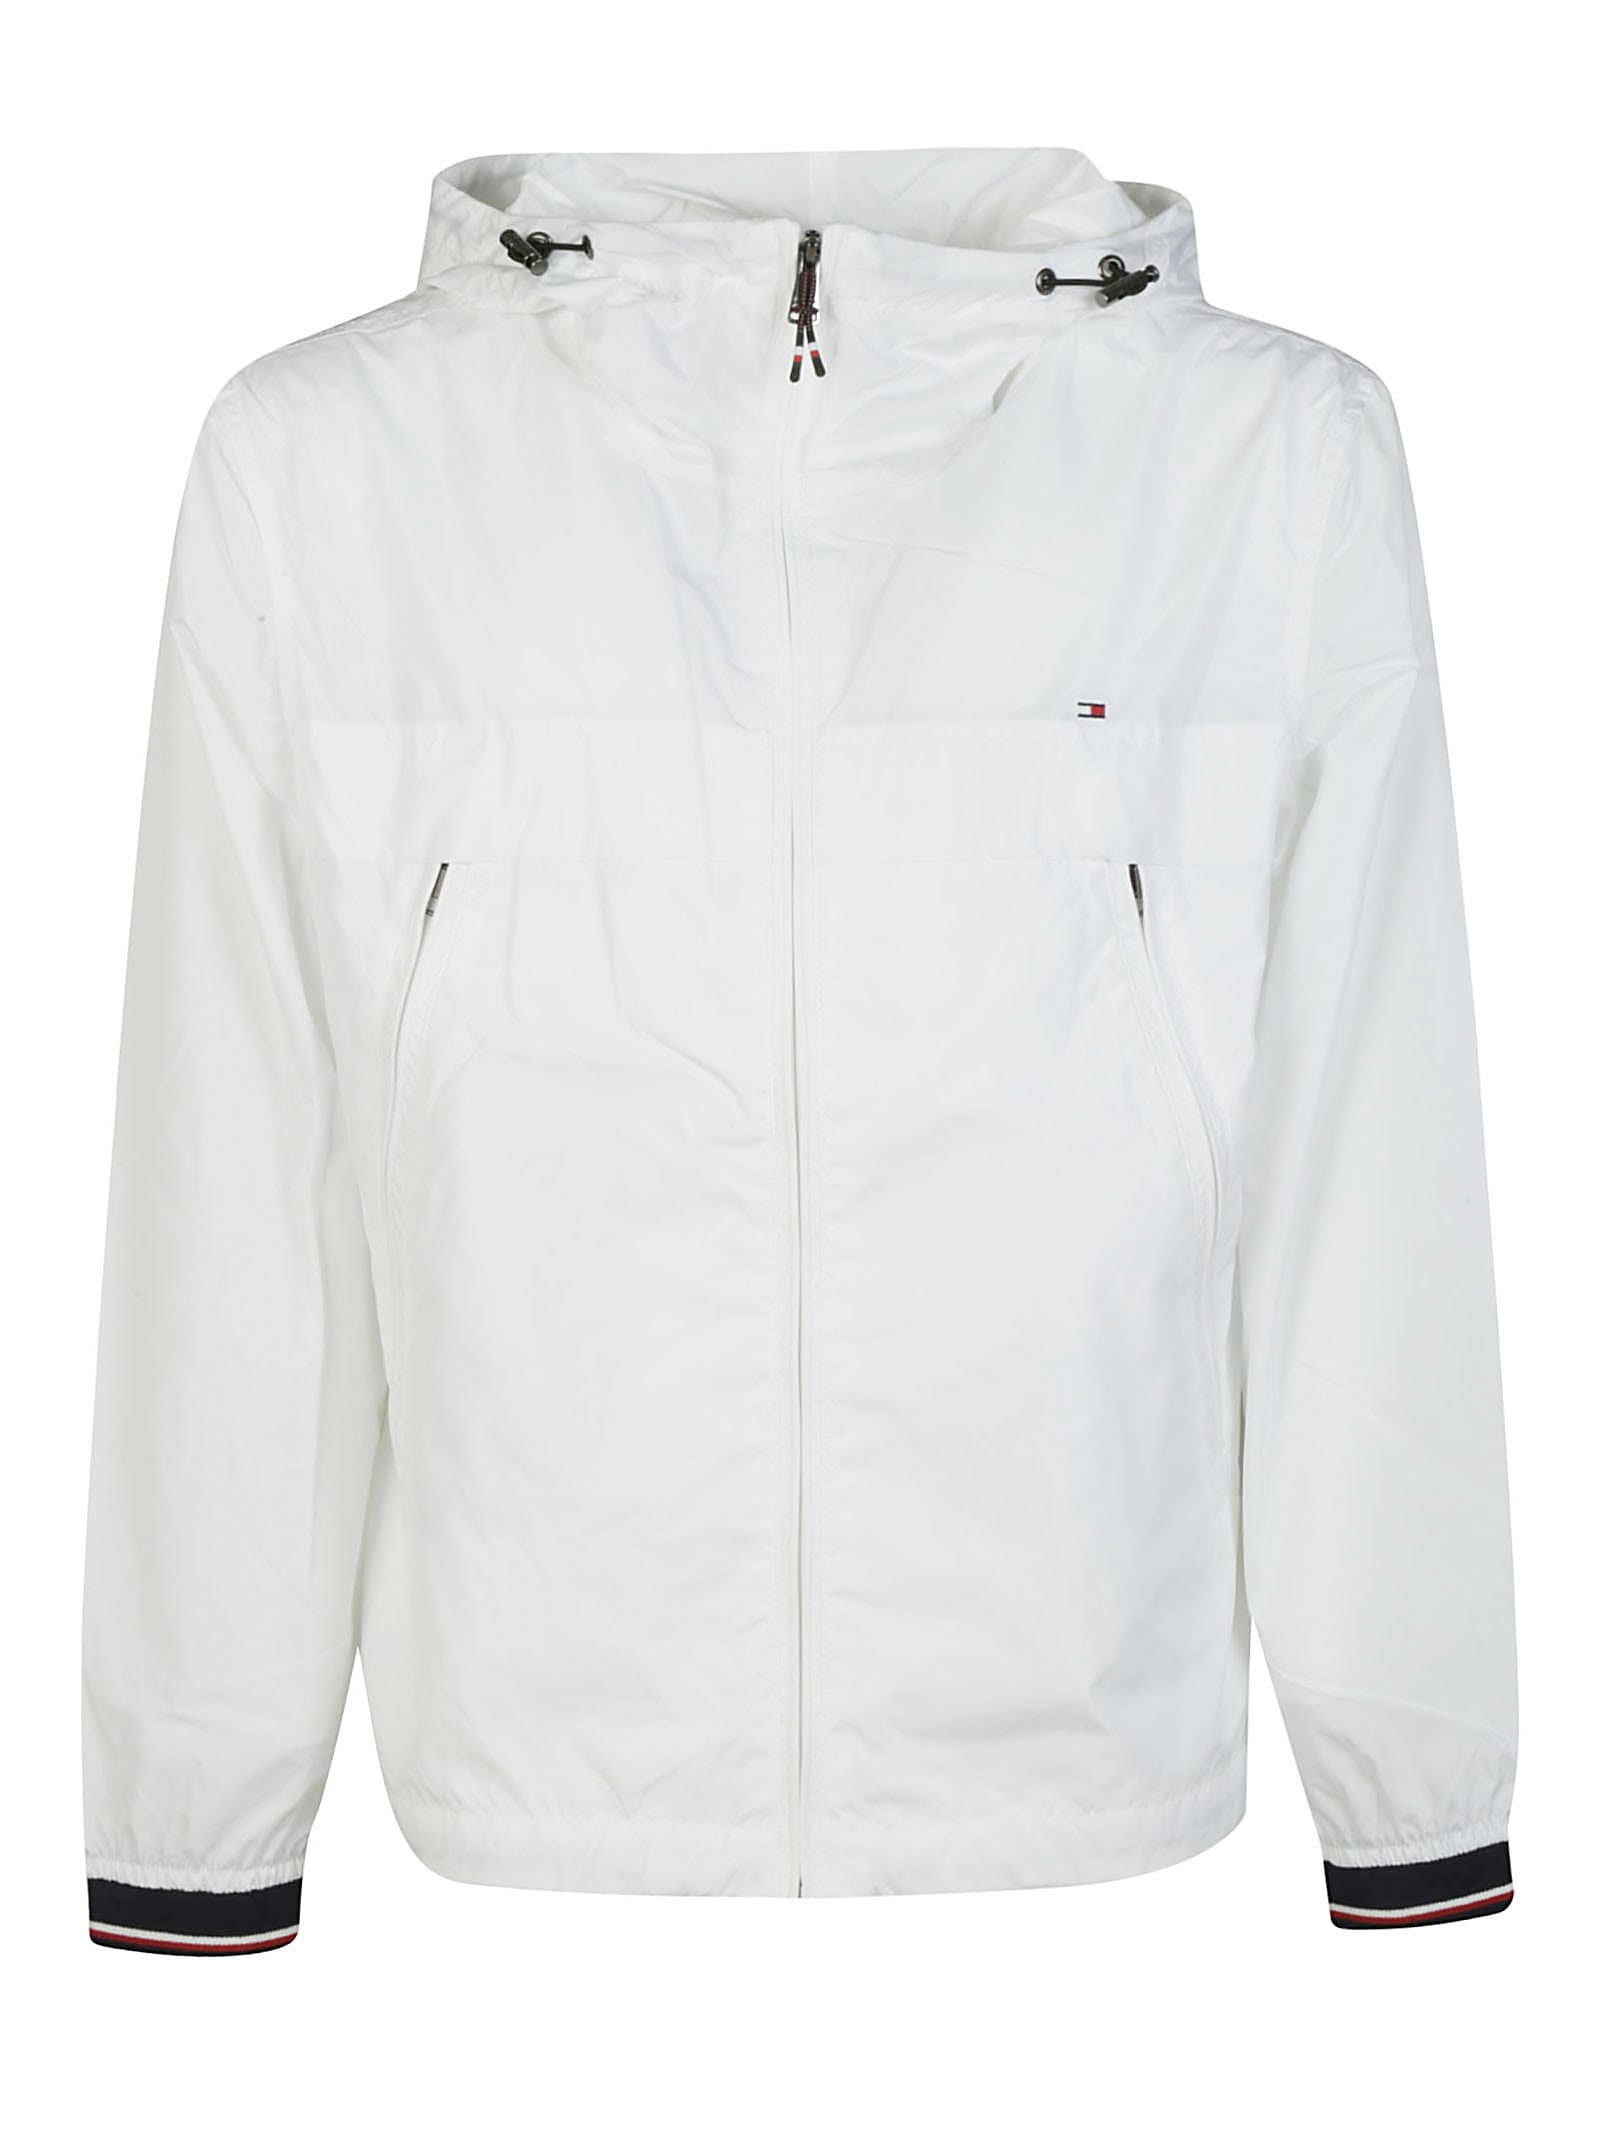 TOMMY HILFIGER LIGHT WEIGHT HOODED JACKET,11292180